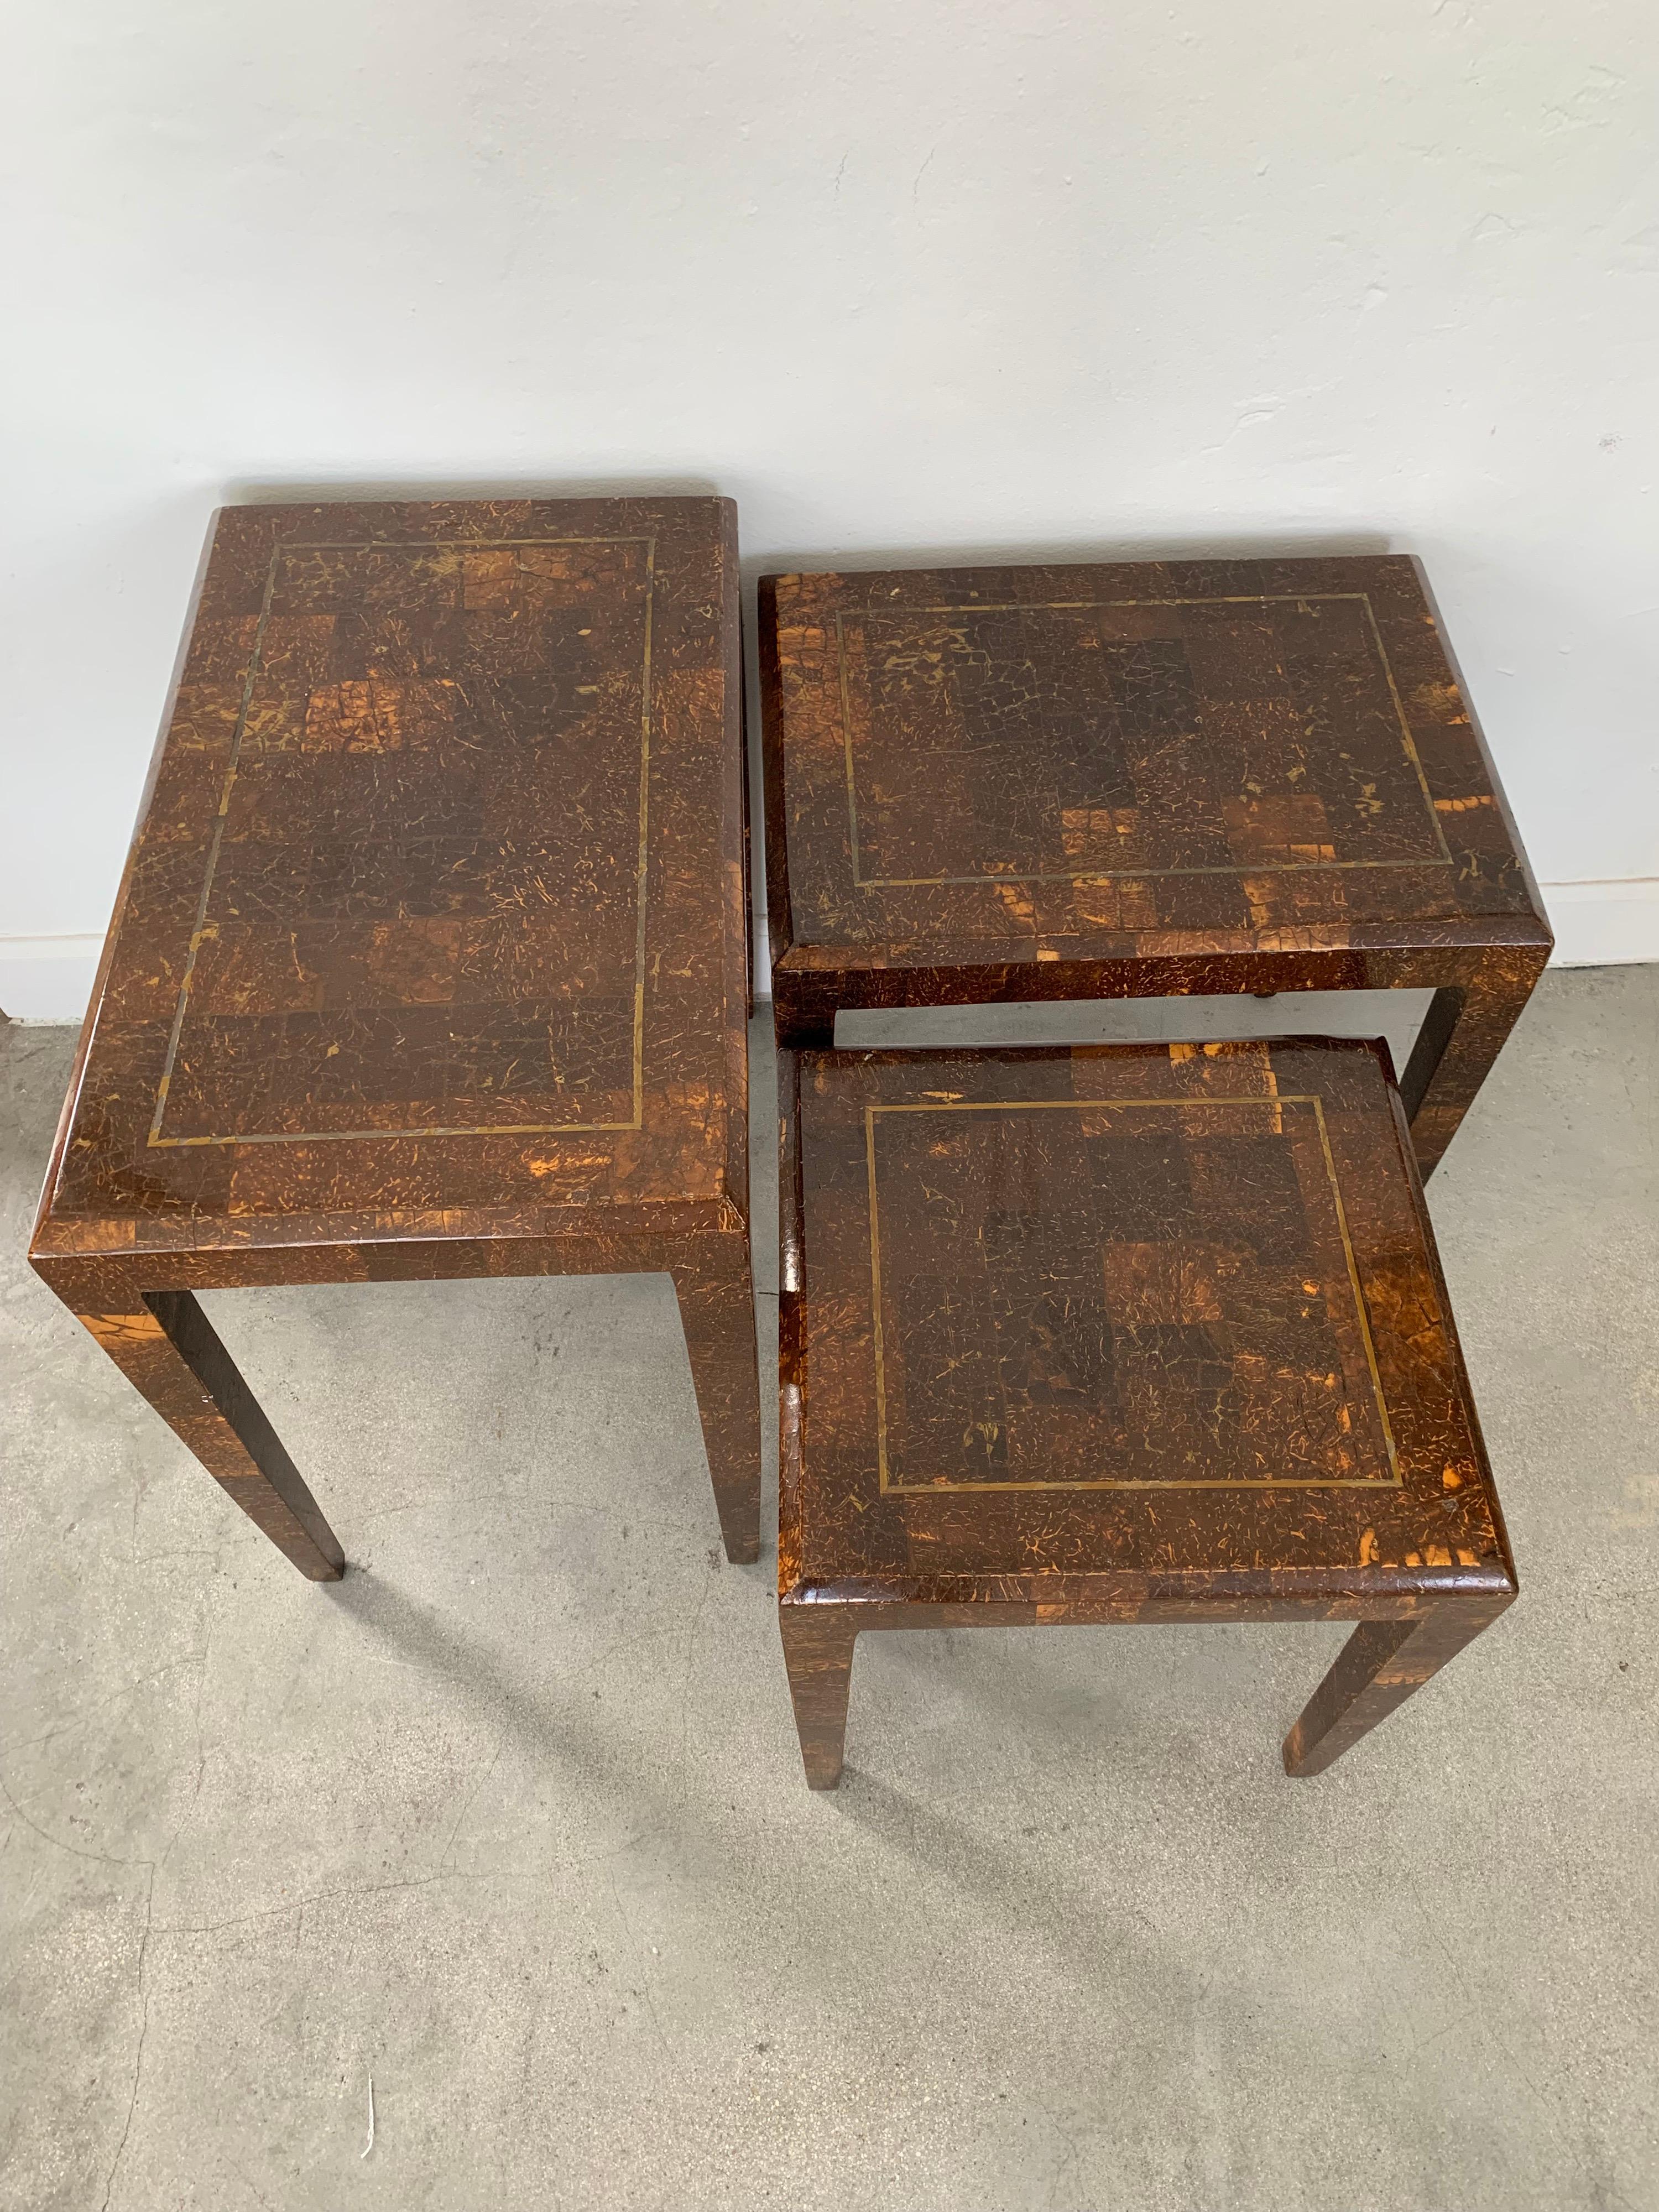 Philippine Mainland Smith Coconut Shell and Brass Inlay Nesting Tables